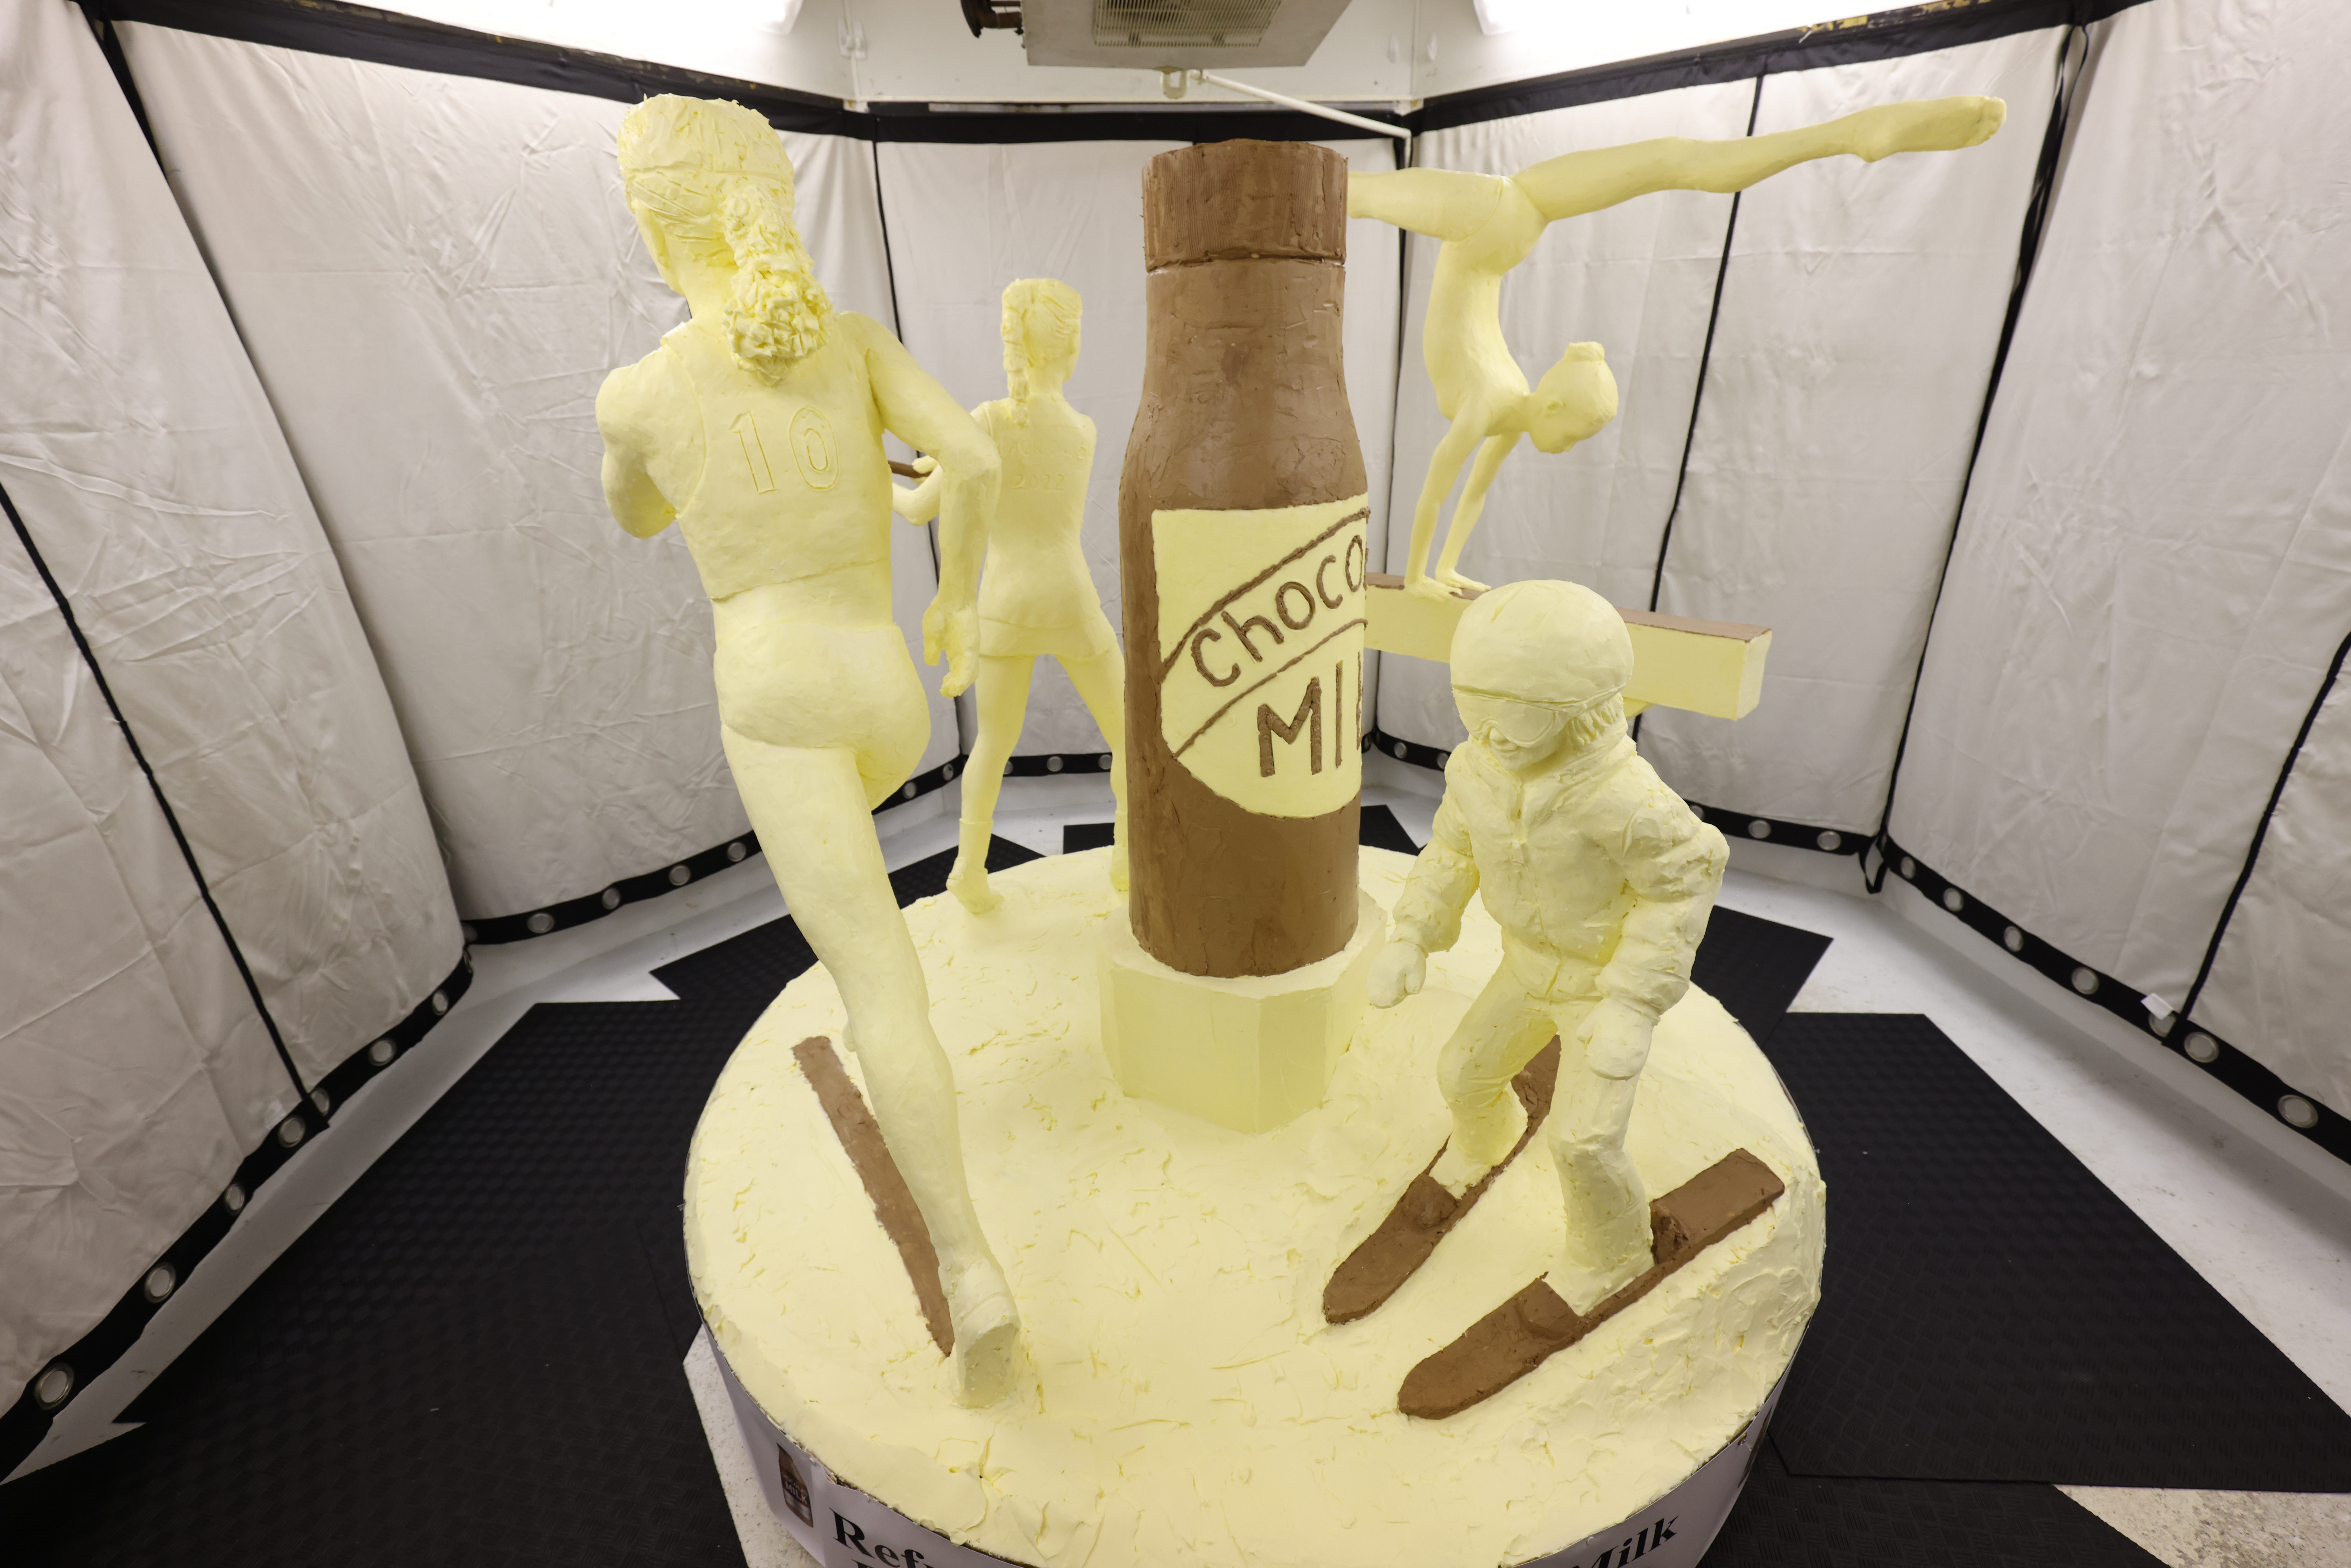 Syracuse Mets take the field as the Butter Sculptures